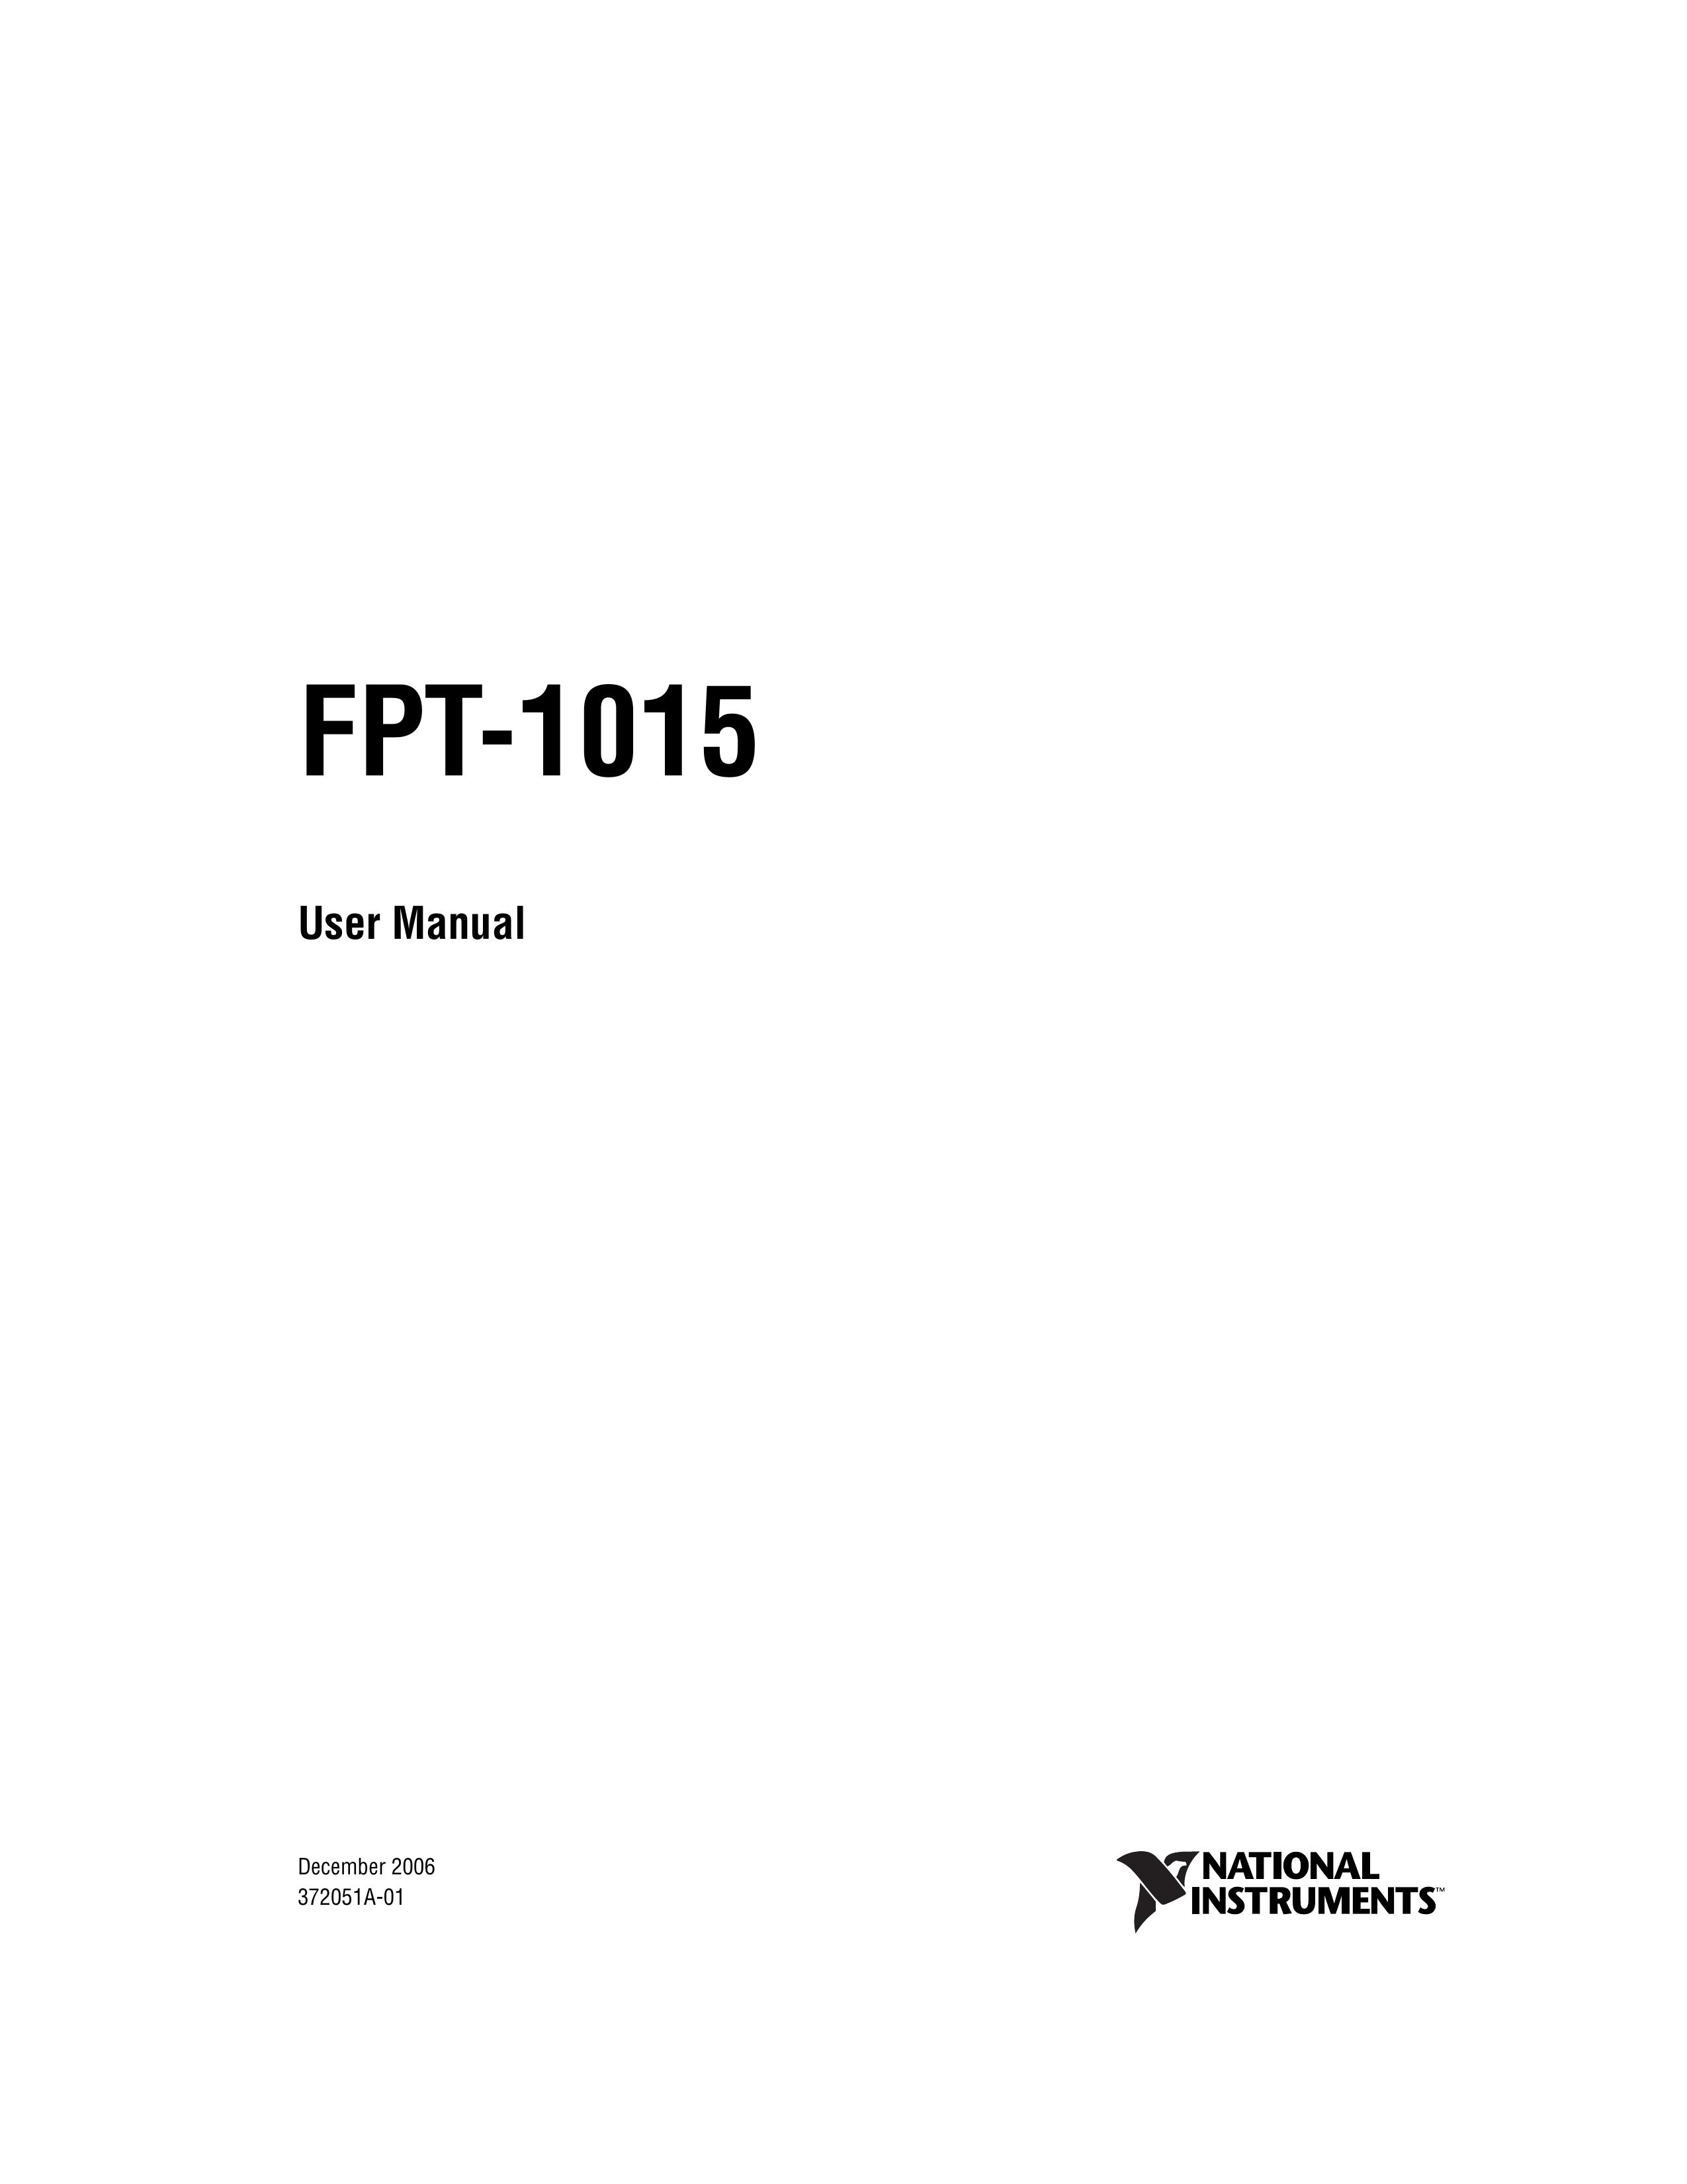 National Instruments FPT-1015 Camera Accessories User Manual